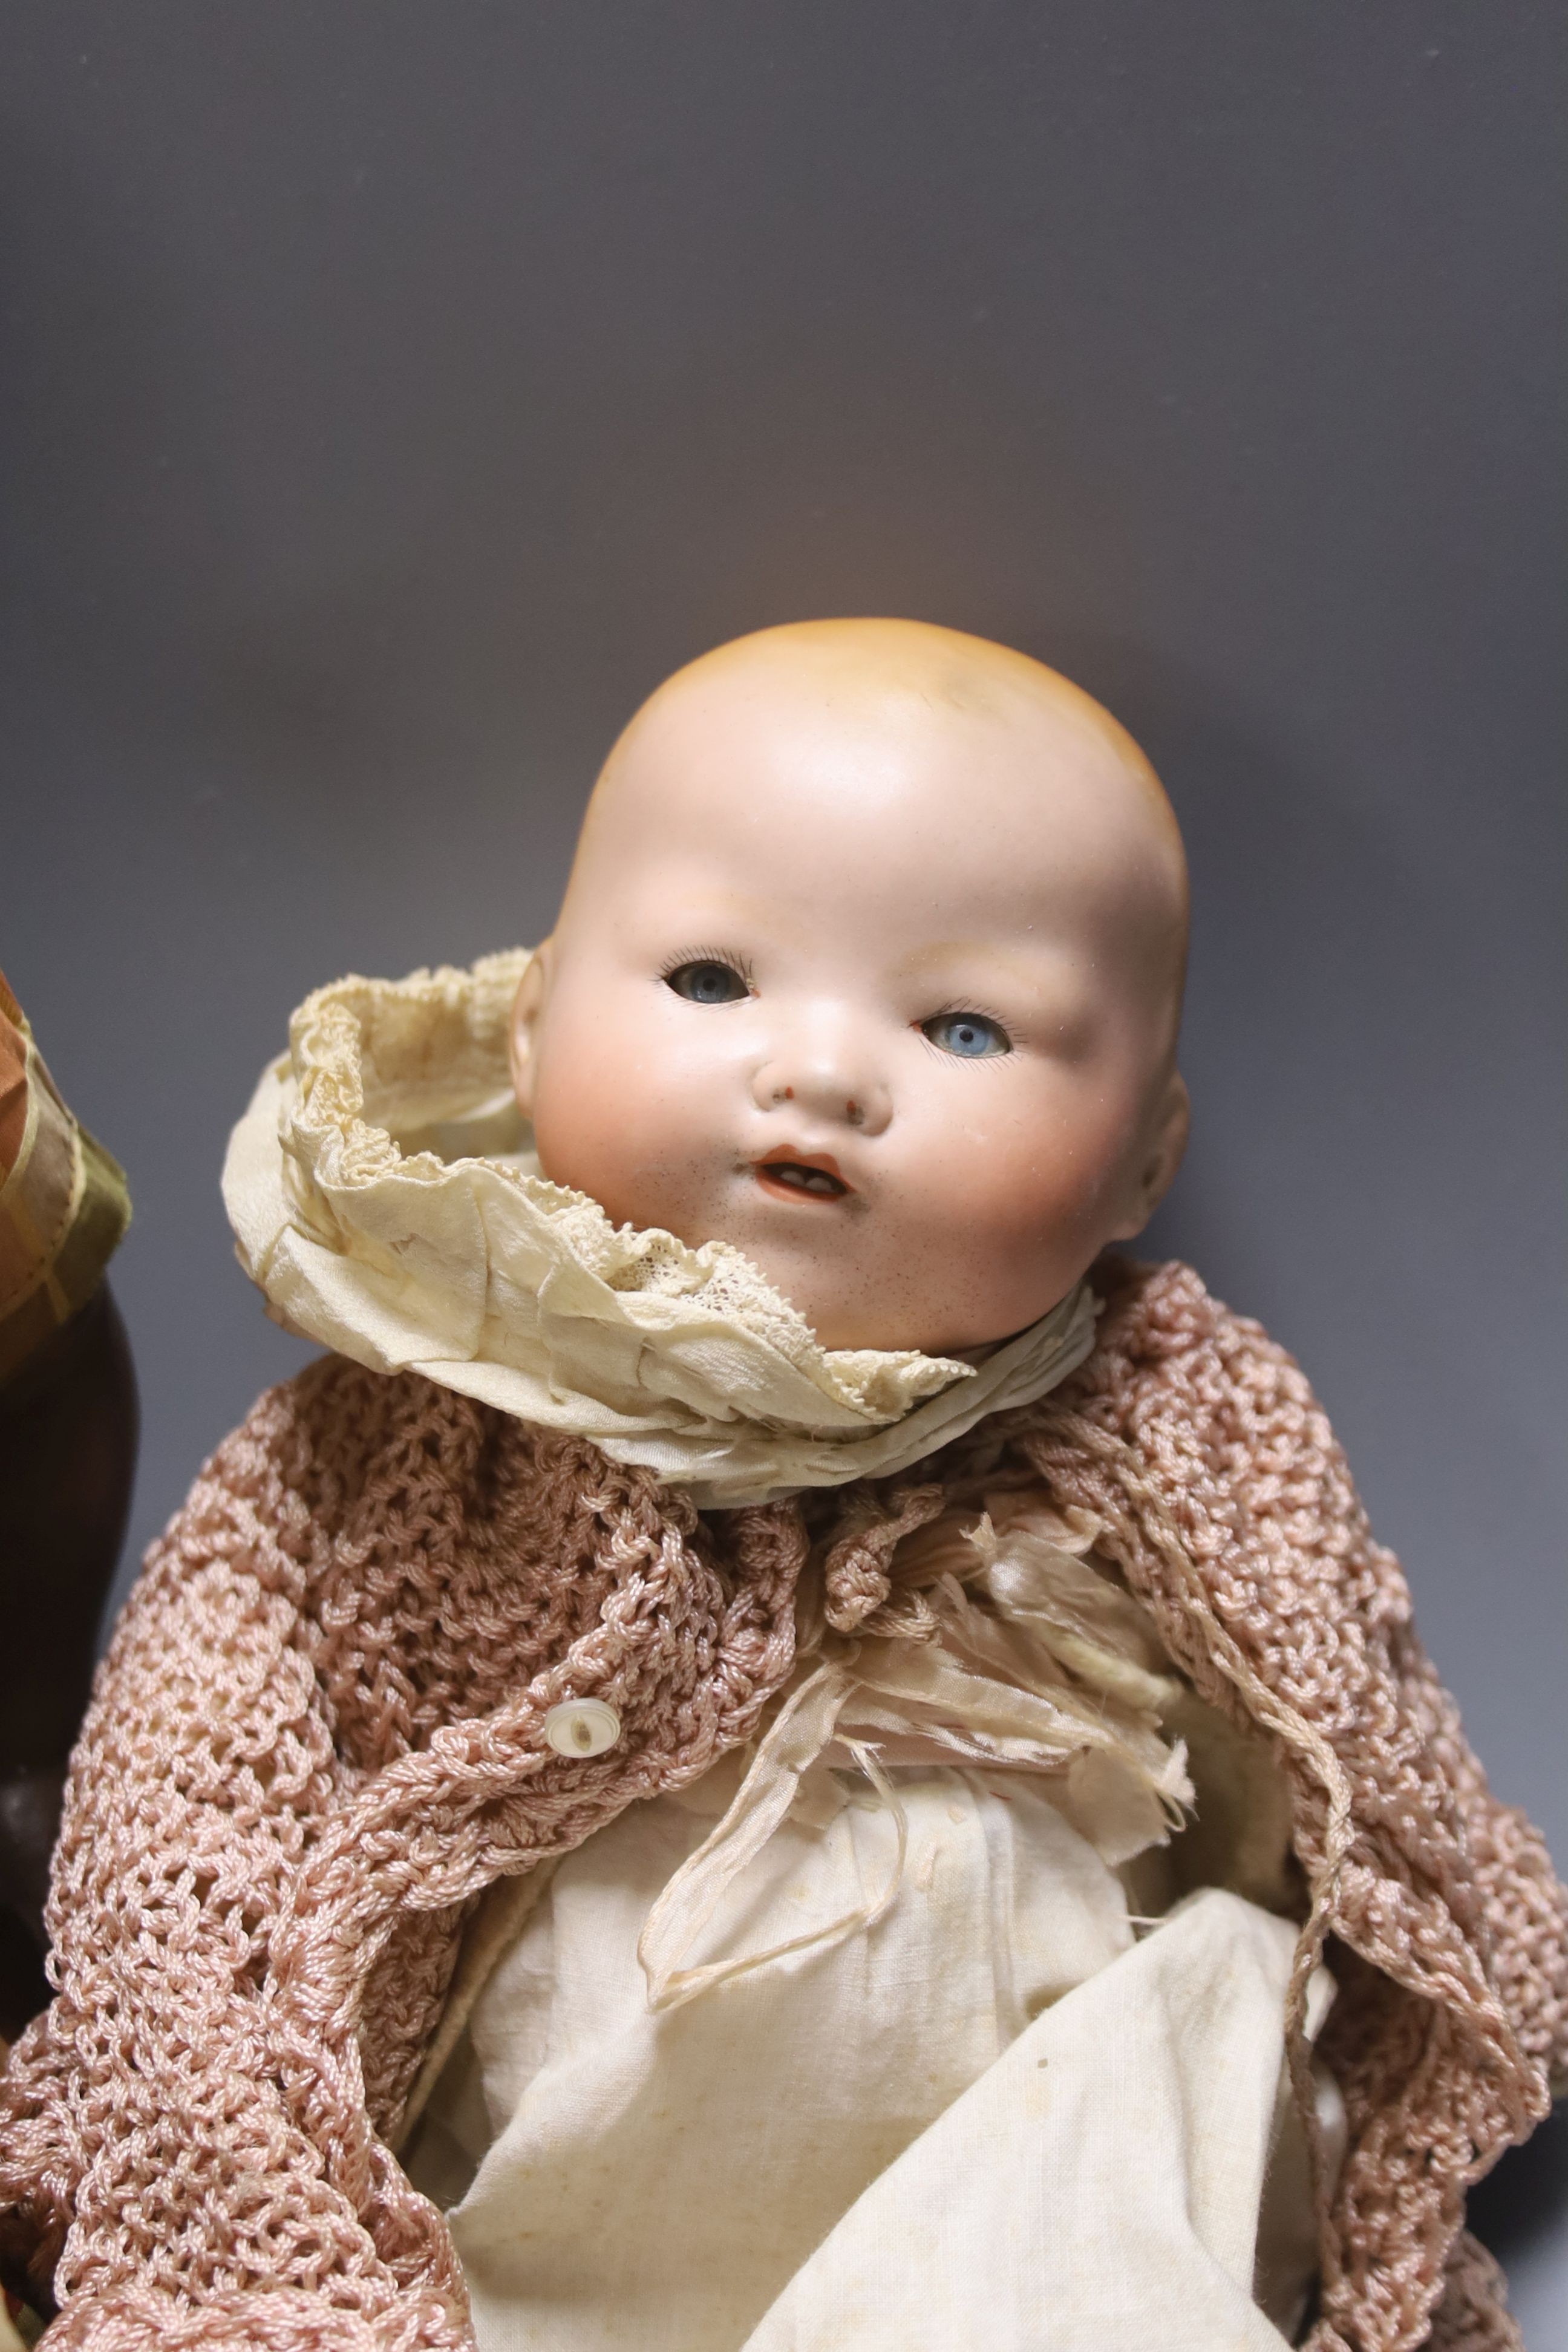 A black bisque-headed doll, German KB-M 5 bent limb with a smaller German bisque open mouth kid leather body doll and an AM Dream baby 351 with open mouth